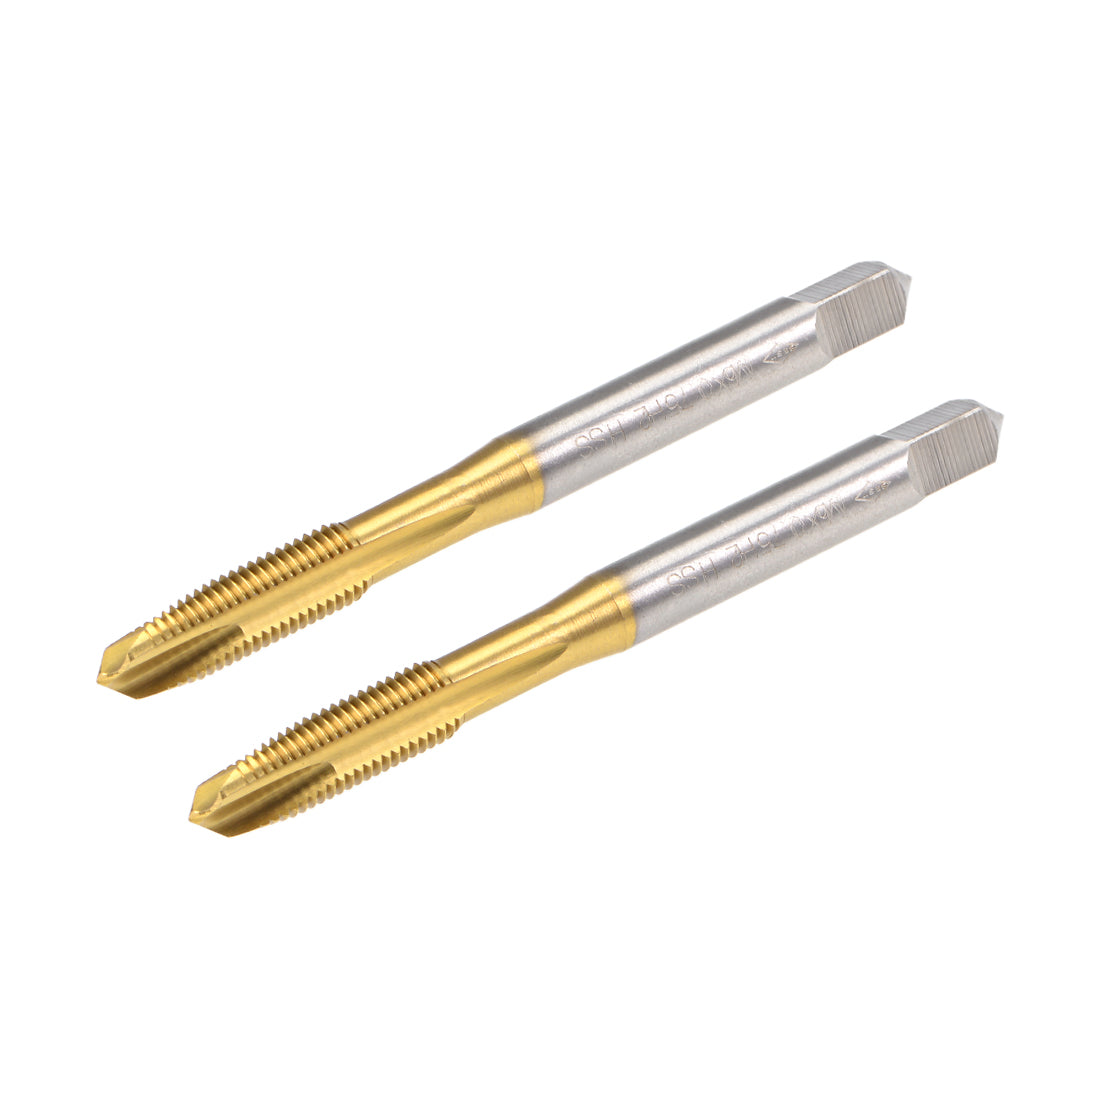 uxcell Uxcell Spiral Point Threading Tap M6 Thread 0.75 Pitch Titanium Coated HSS 2pcs